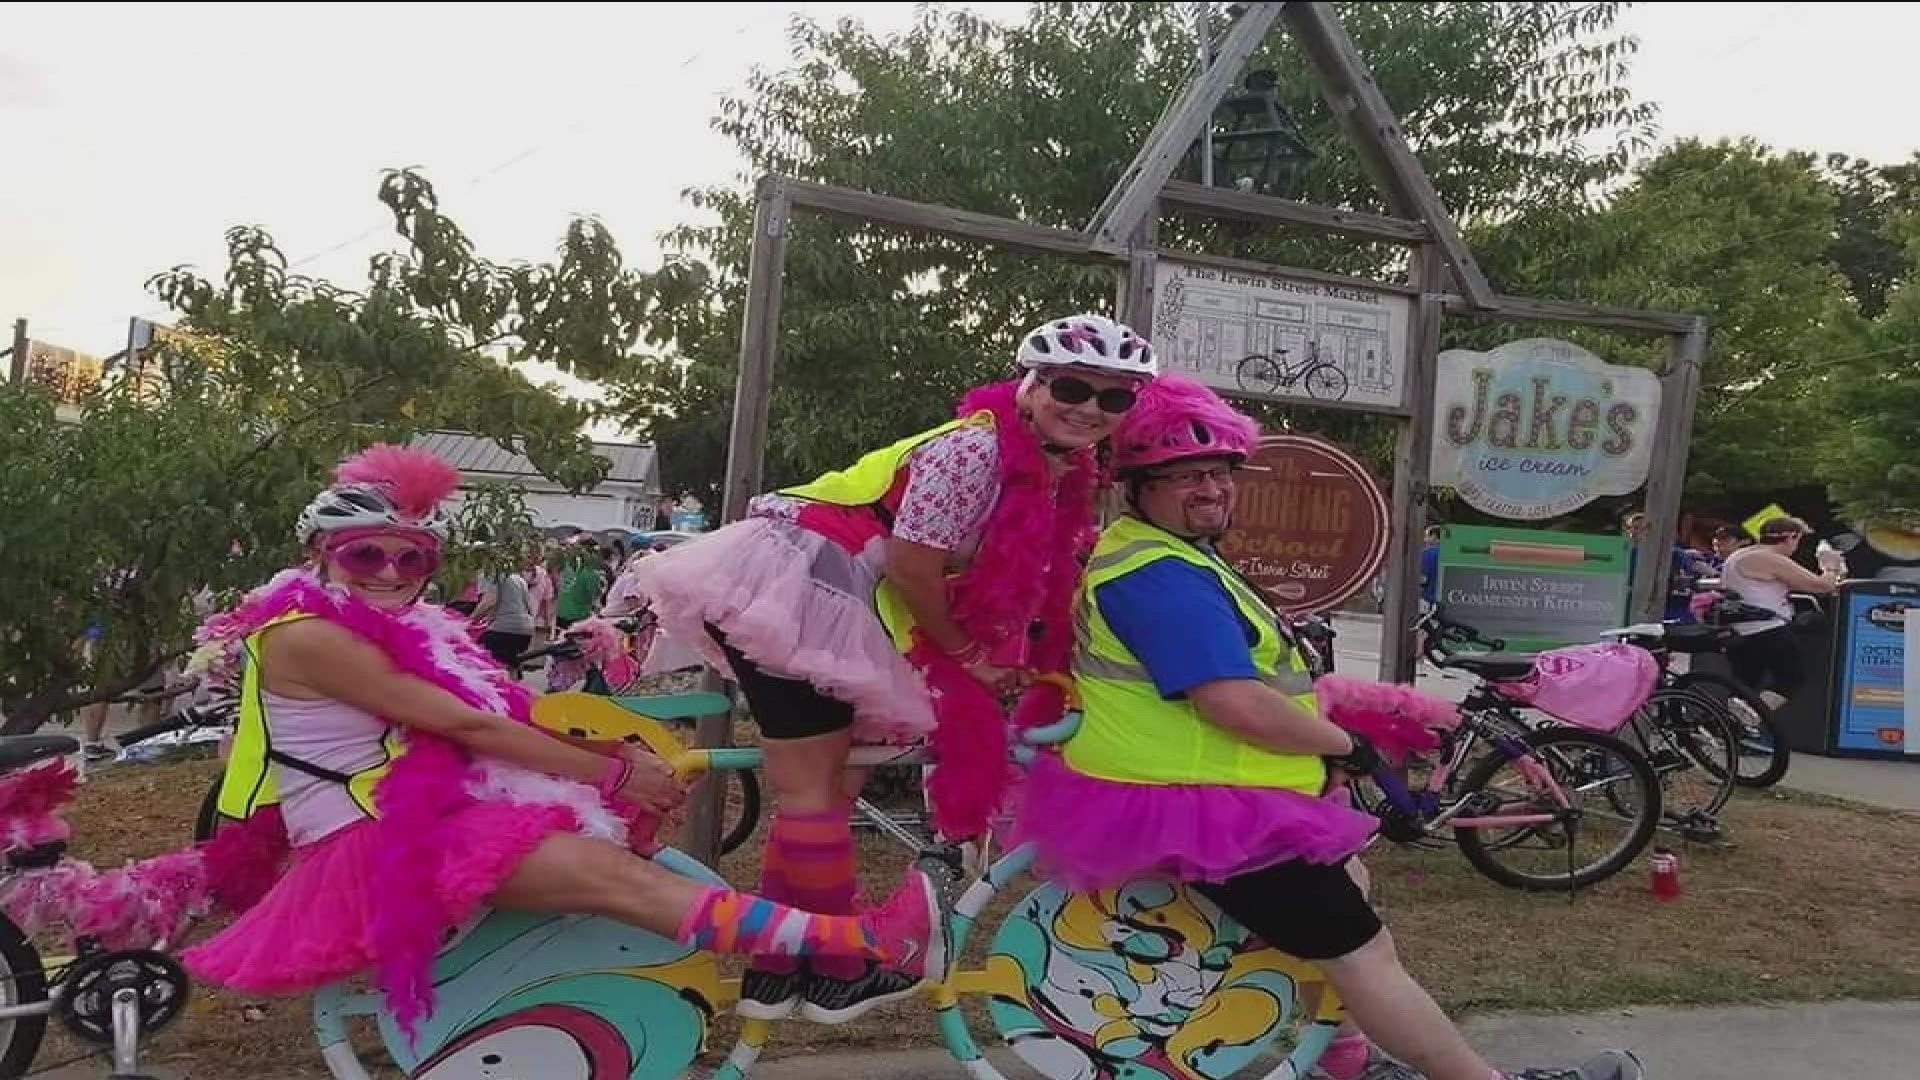 The Georgia two-day walk for breast cancer has raised around $750,000 for breast cancer research and mammograms